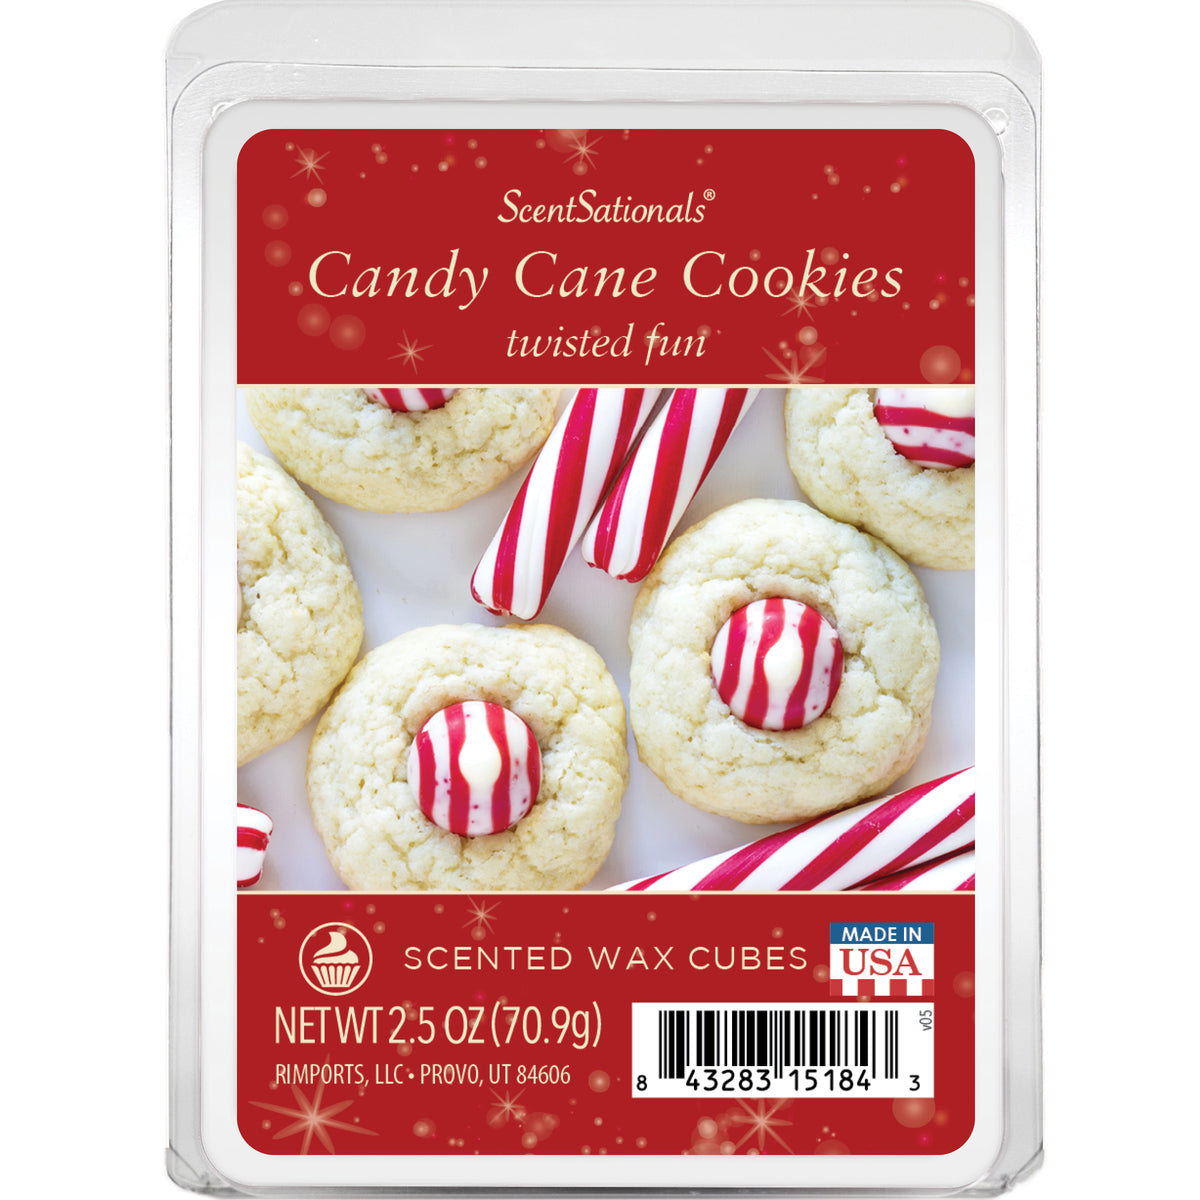 ScentSationals Wax Melts - CANDY CANE ICE CREAM – Angie's American Sweets &  Treats